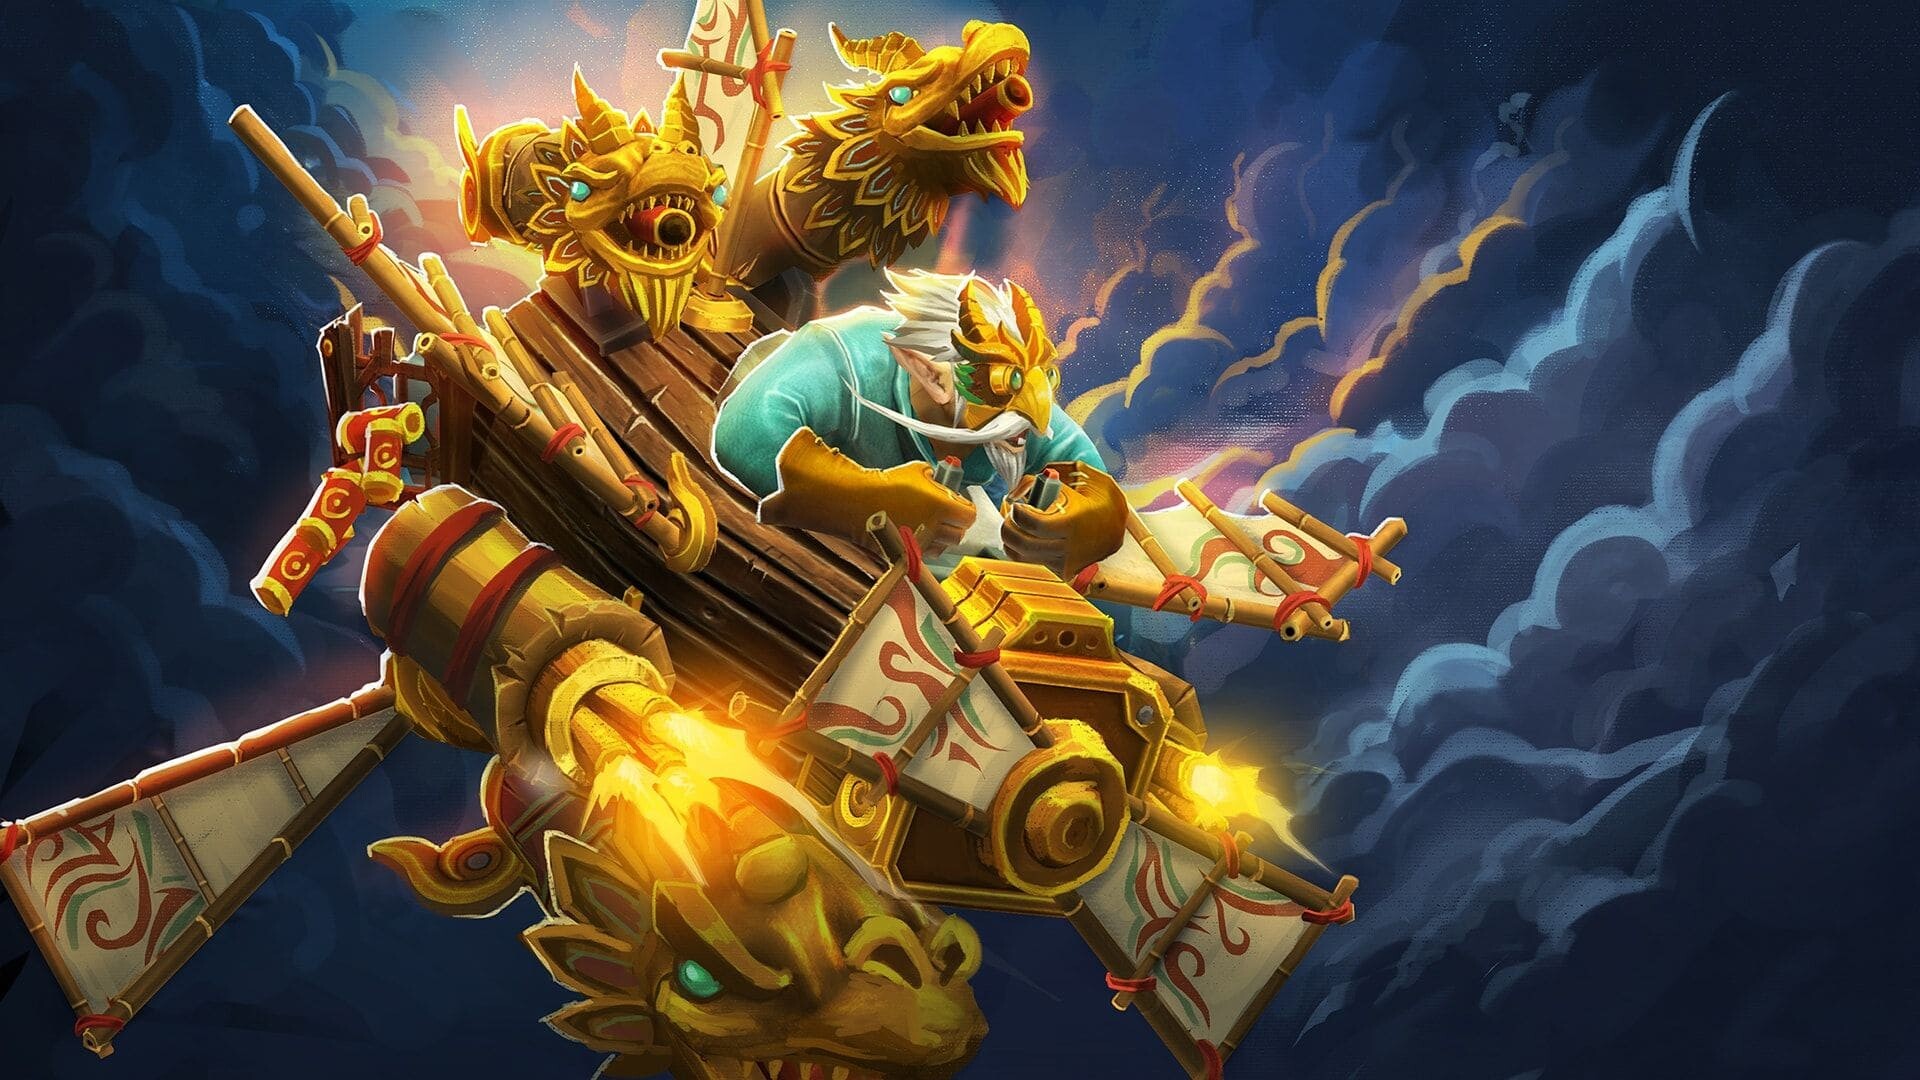 Dota 2: Gyrocopter, Barrages with his cannon and homing missiles. 1920x1080 Full HD Wallpaper.